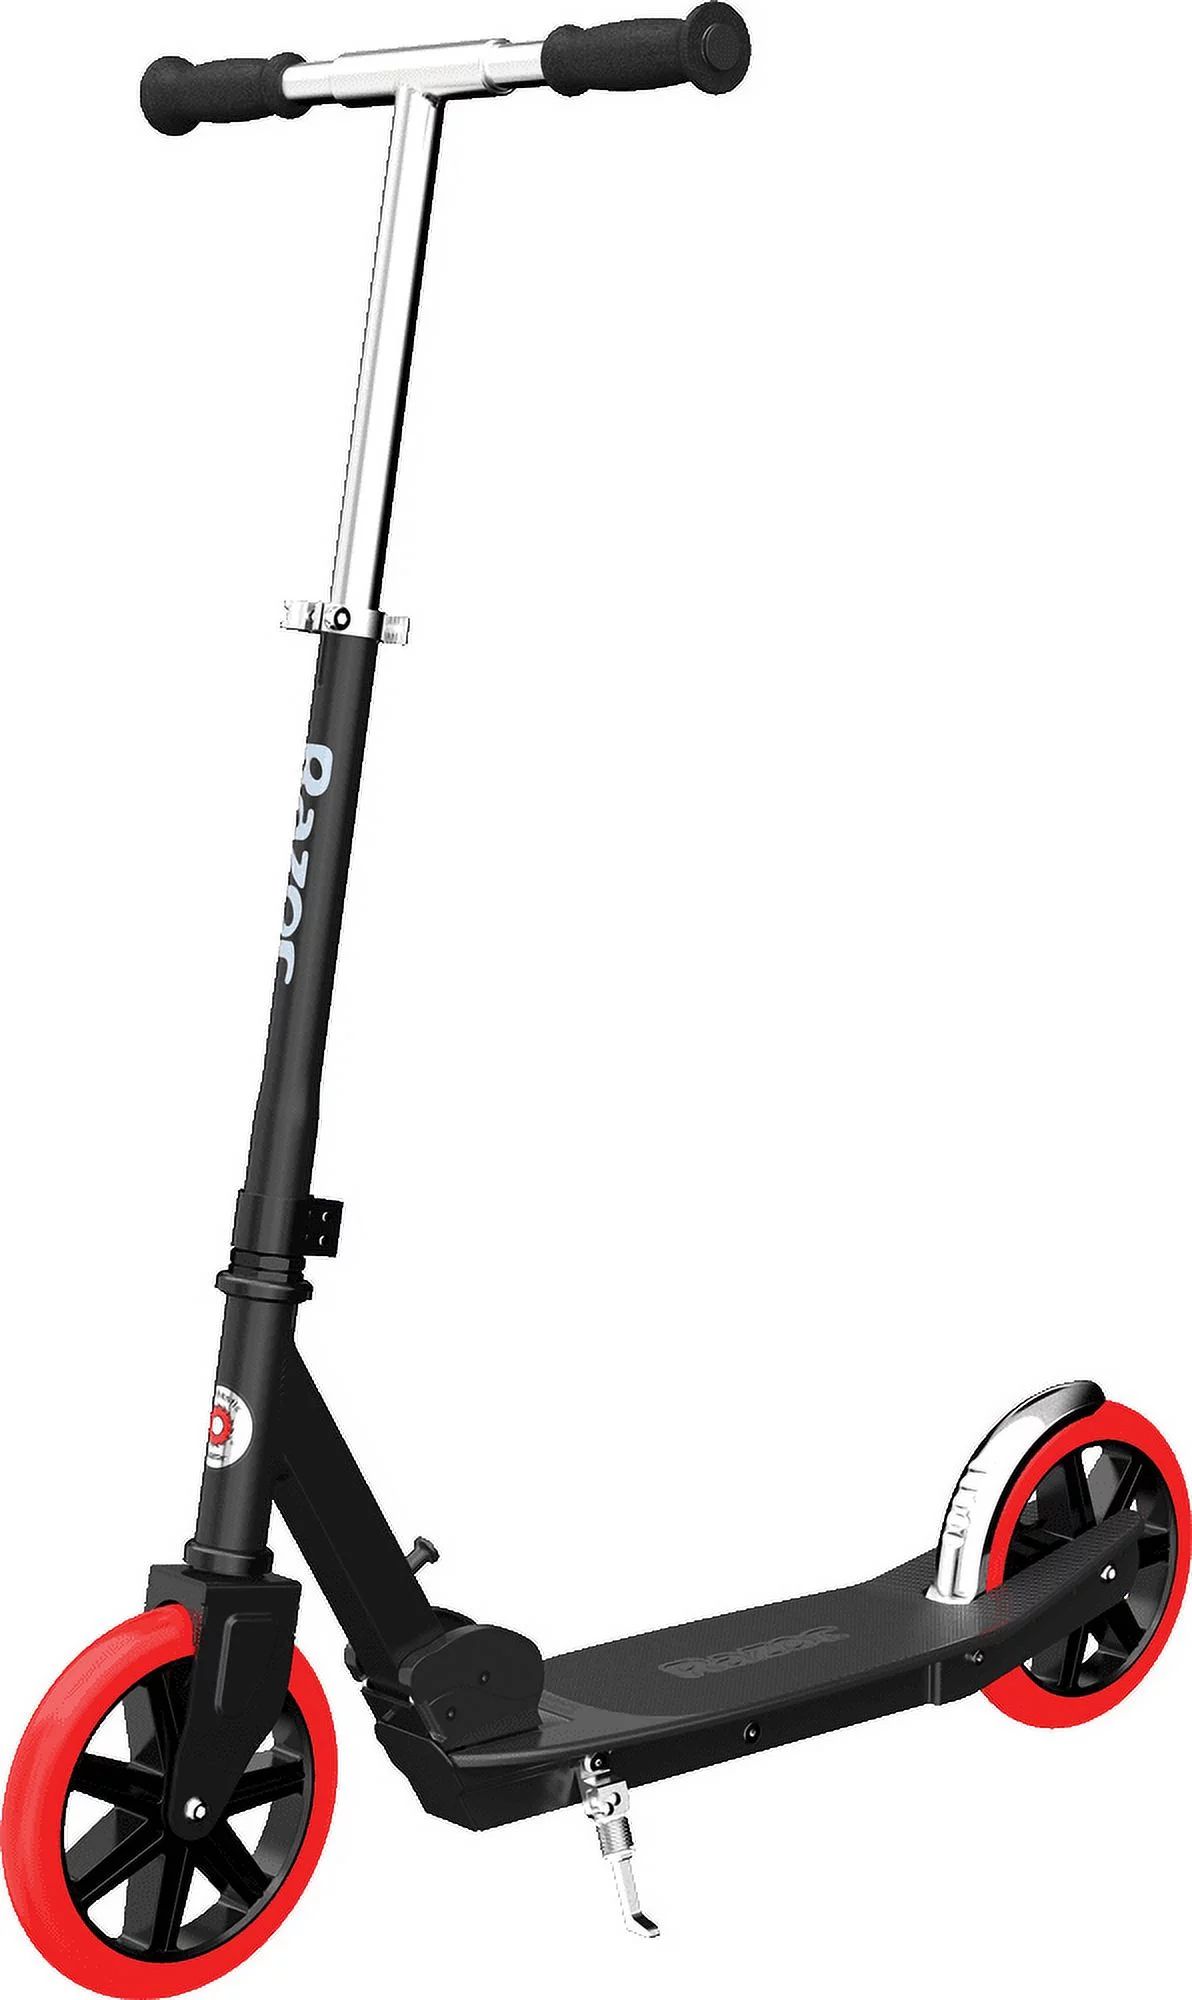 Razor Carbon Lux Kick Scooter - Red/Black, Spoked Large Wheels, Folding Scooter for Up to 220 lbs | Walmart (US)